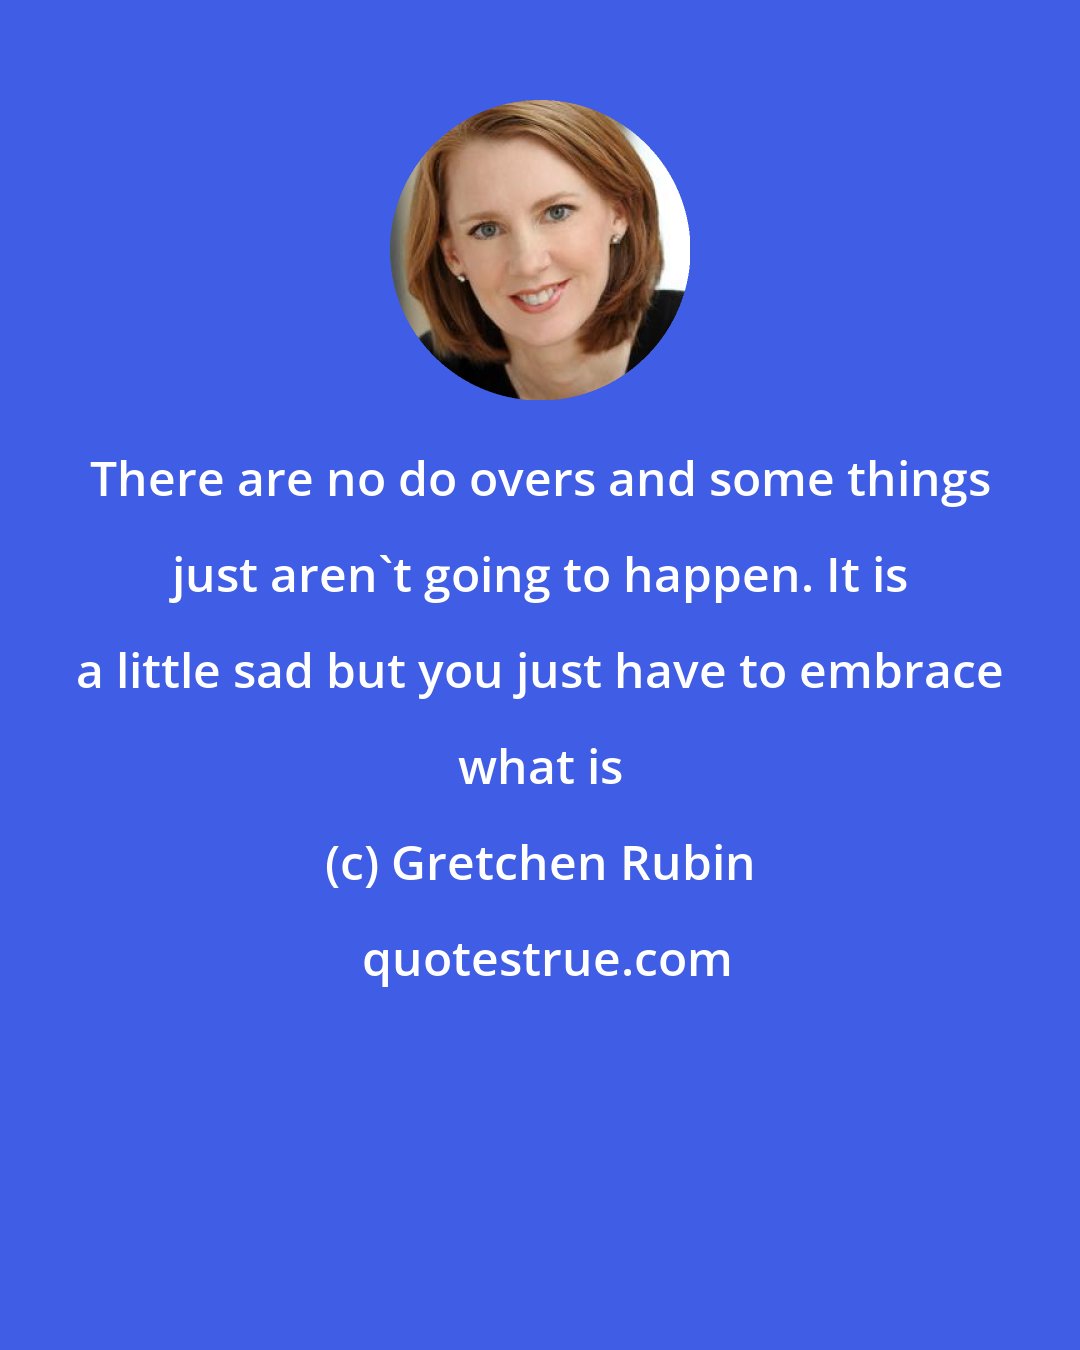 Gretchen Rubin: There are no do overs and some things just aren't going to happen. It is a little sad but you just have to embrace what is